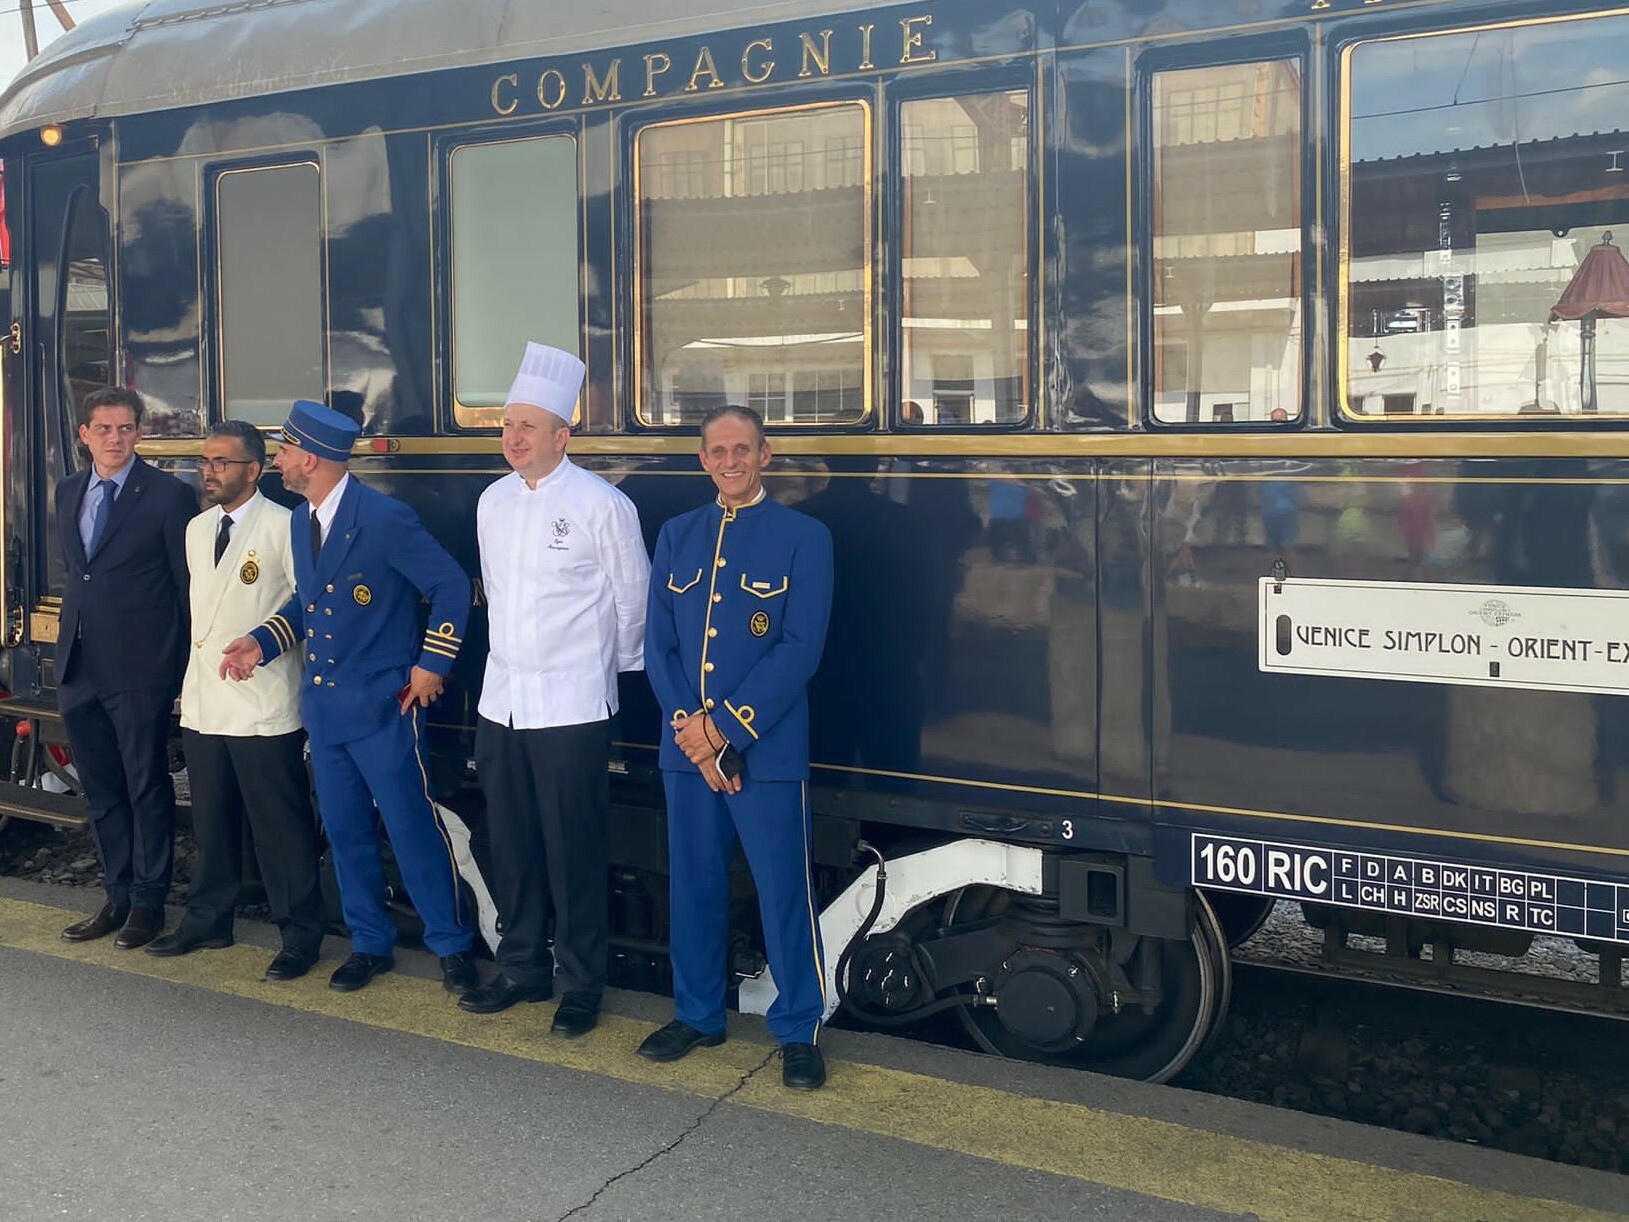 Orient Express has arrived in Romania.  The tickets cost as much as the average salary of a Romanian for two years.  PHOTO GALLERY - Image 4